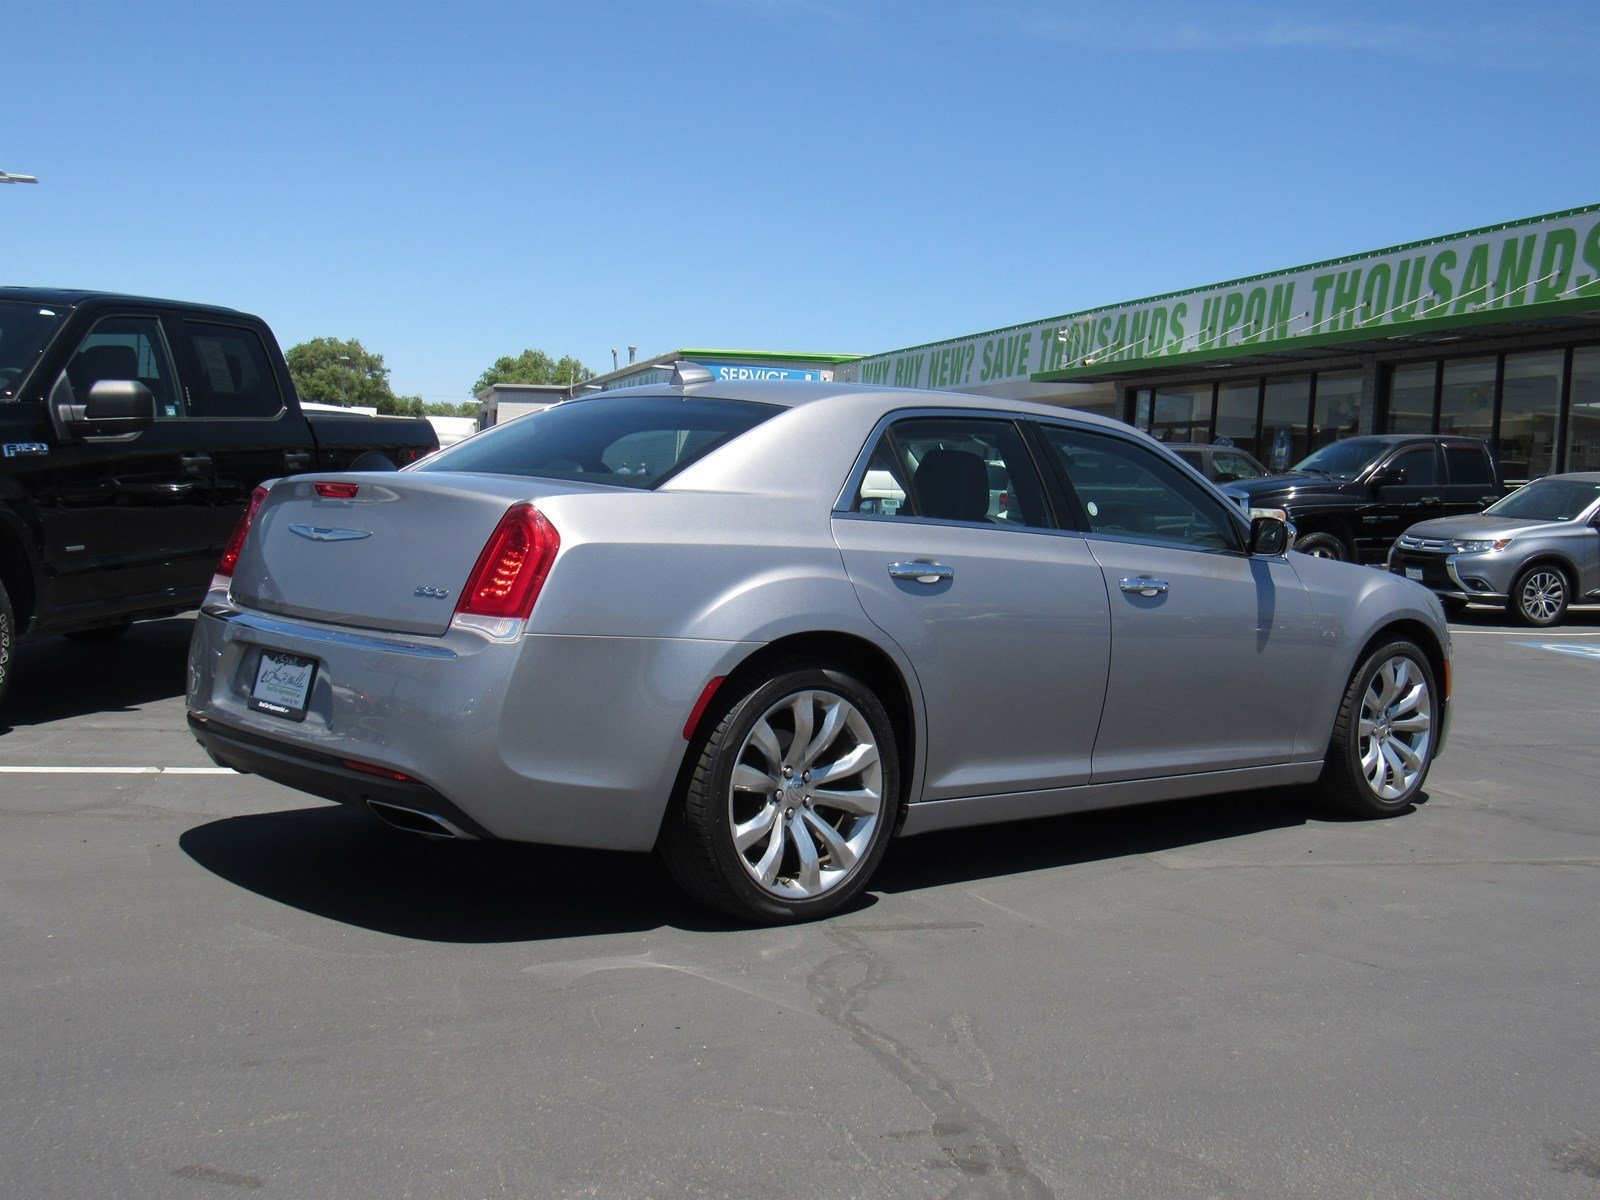 PreOwned 2018 Chrysler 300 Limited 4dr Car in Riverdale 